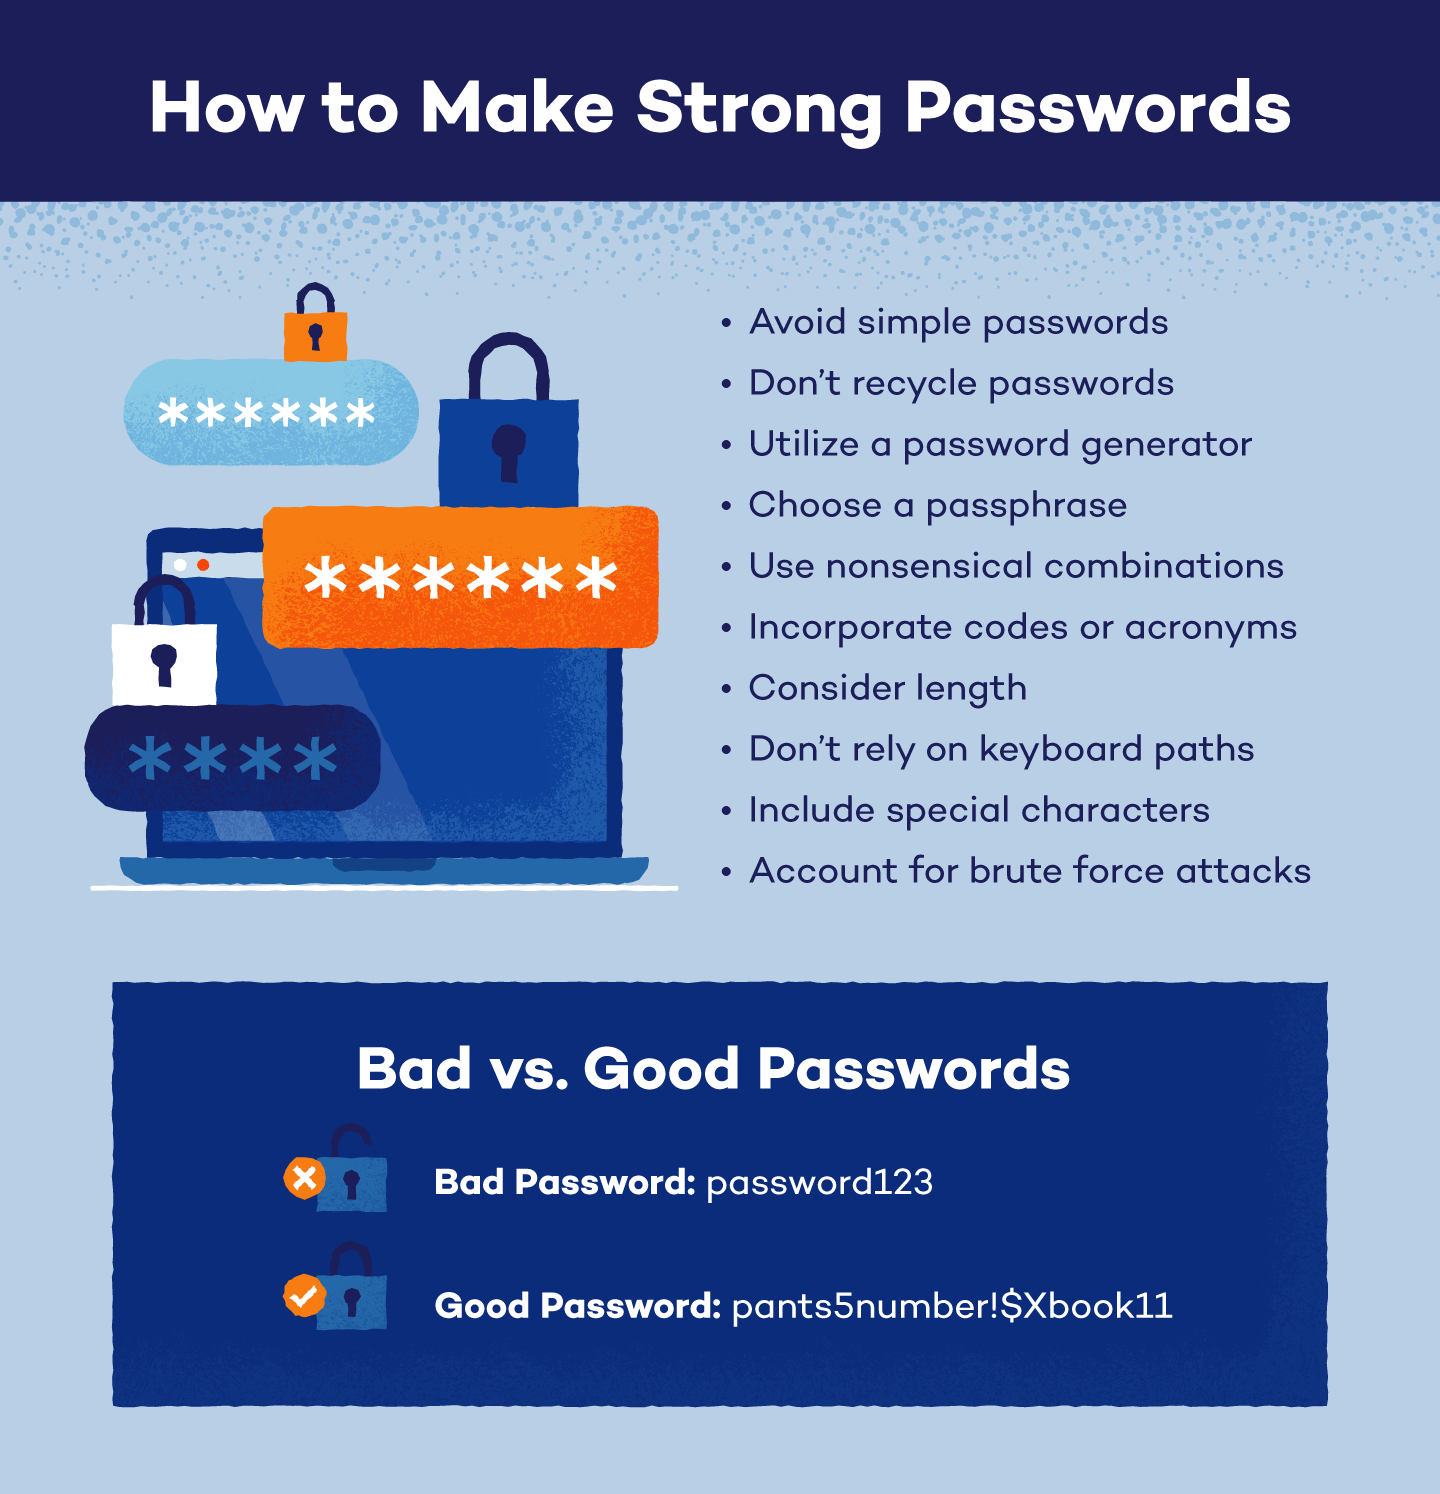 is avast password manager free